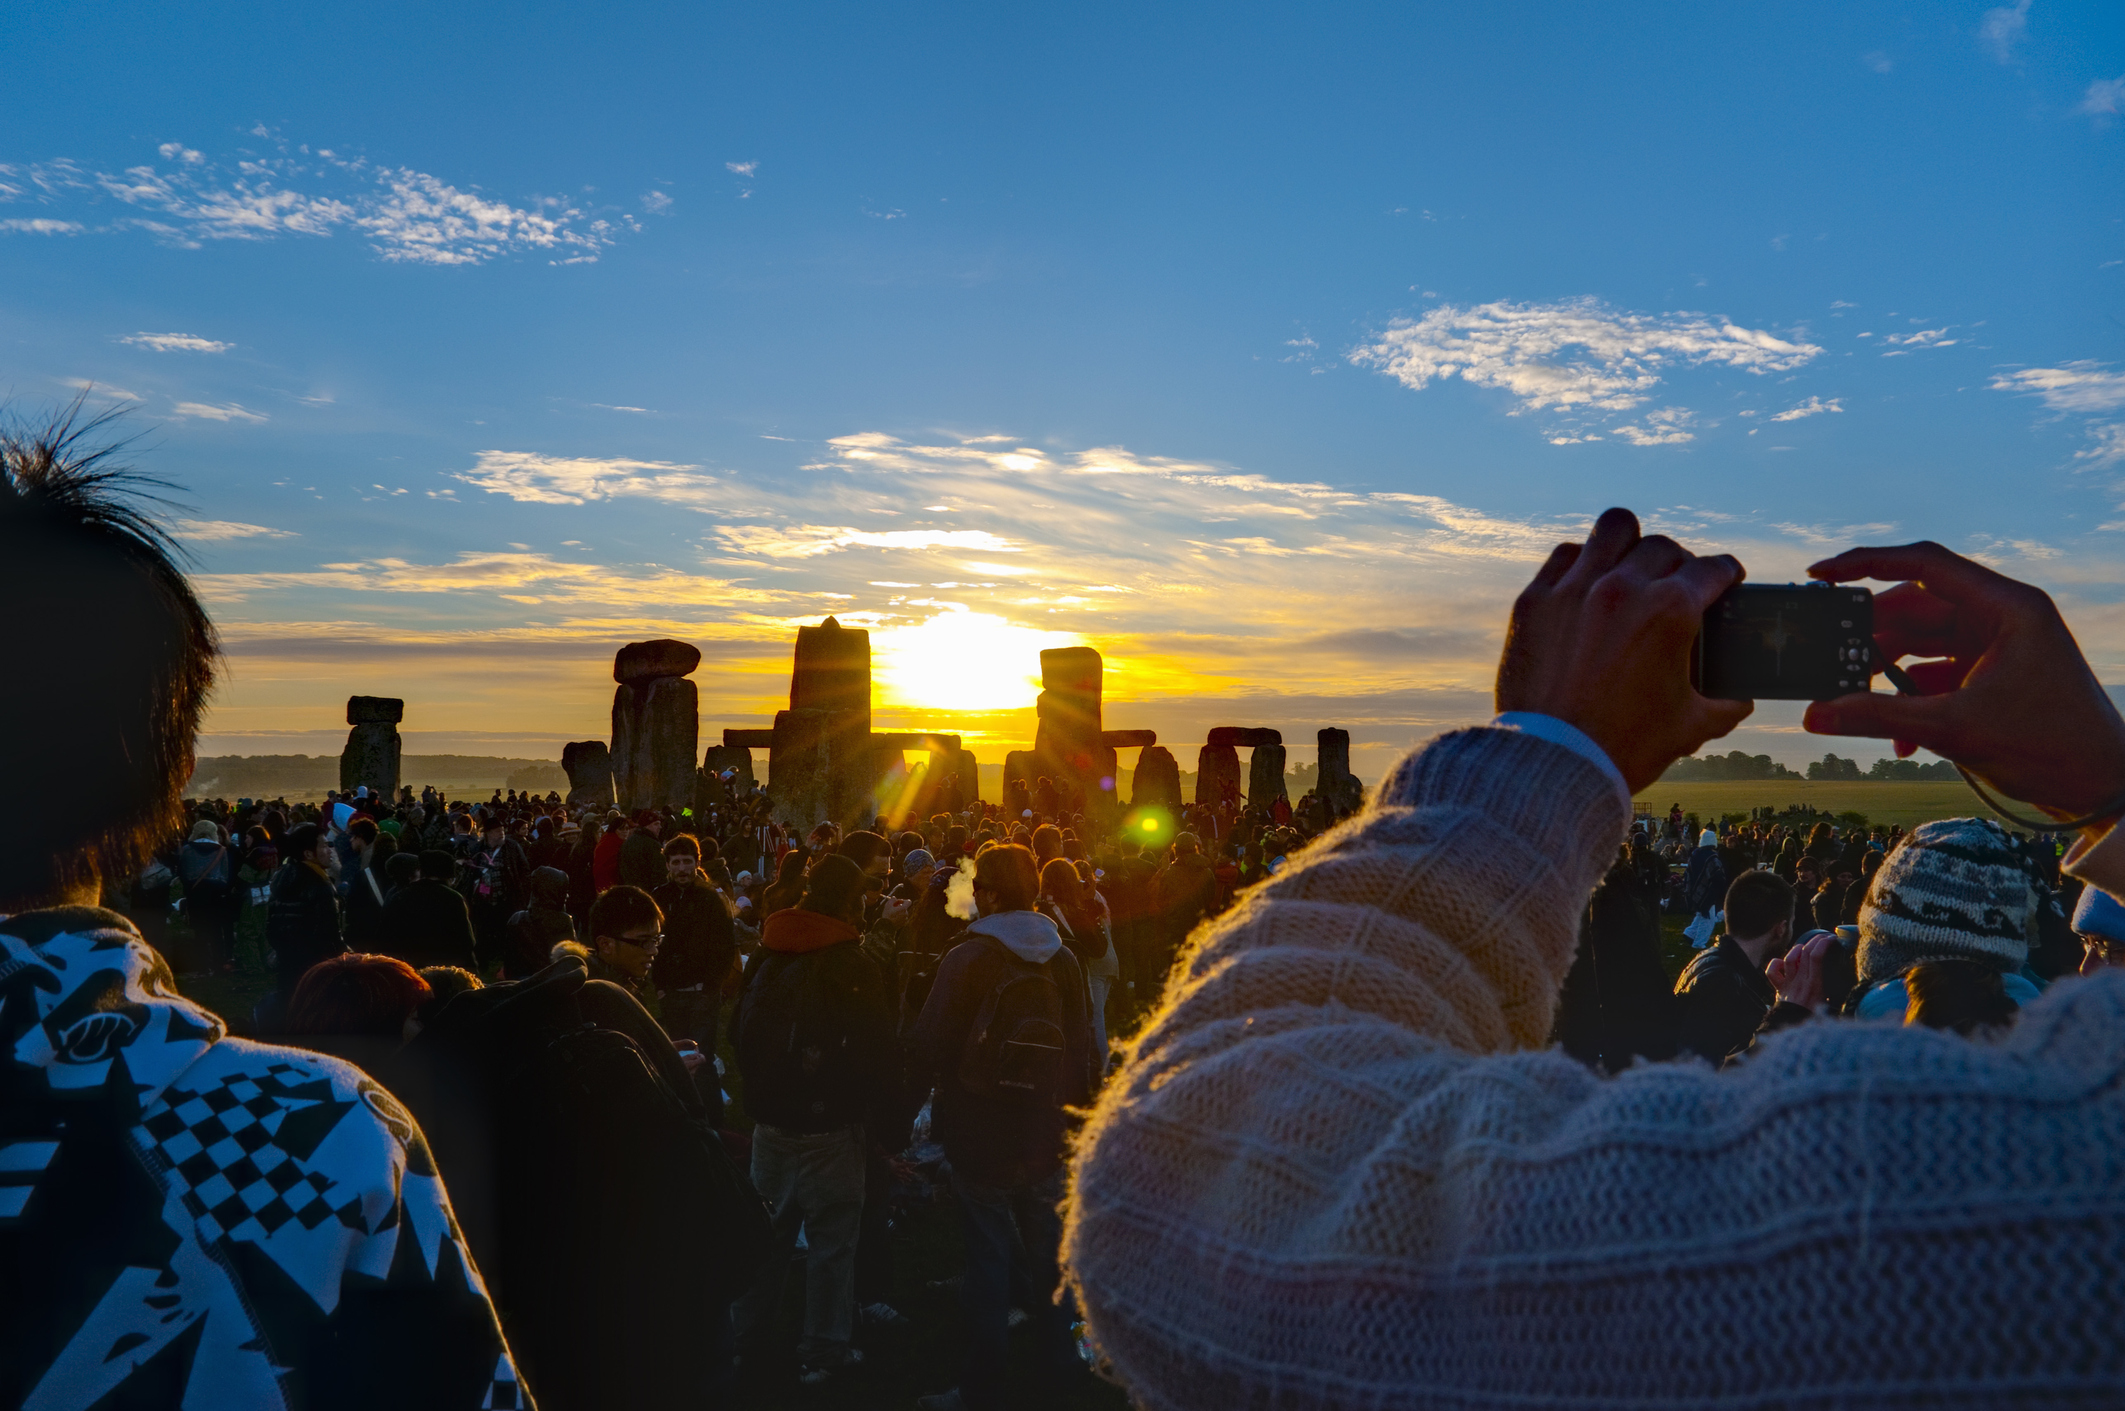 Visitors take photos of the sunrise at Stonehenge in Wiltshire, England. (Alan Copson—AWL Images/Getty Images)